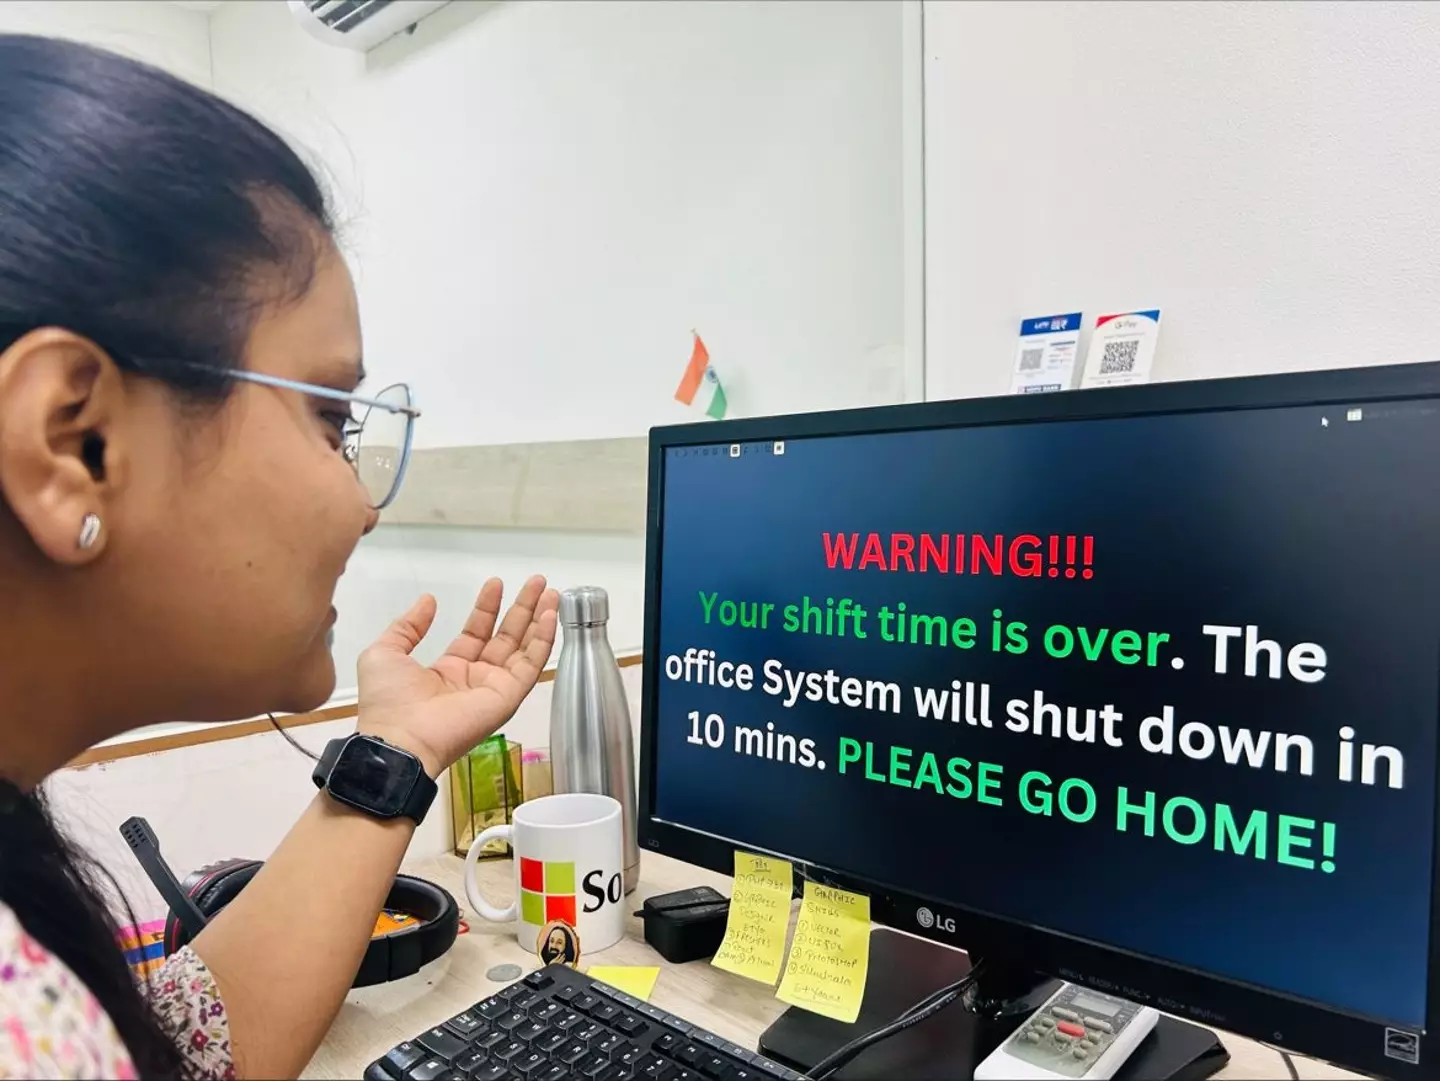 The message employees see at the end of the shift has gone viral.